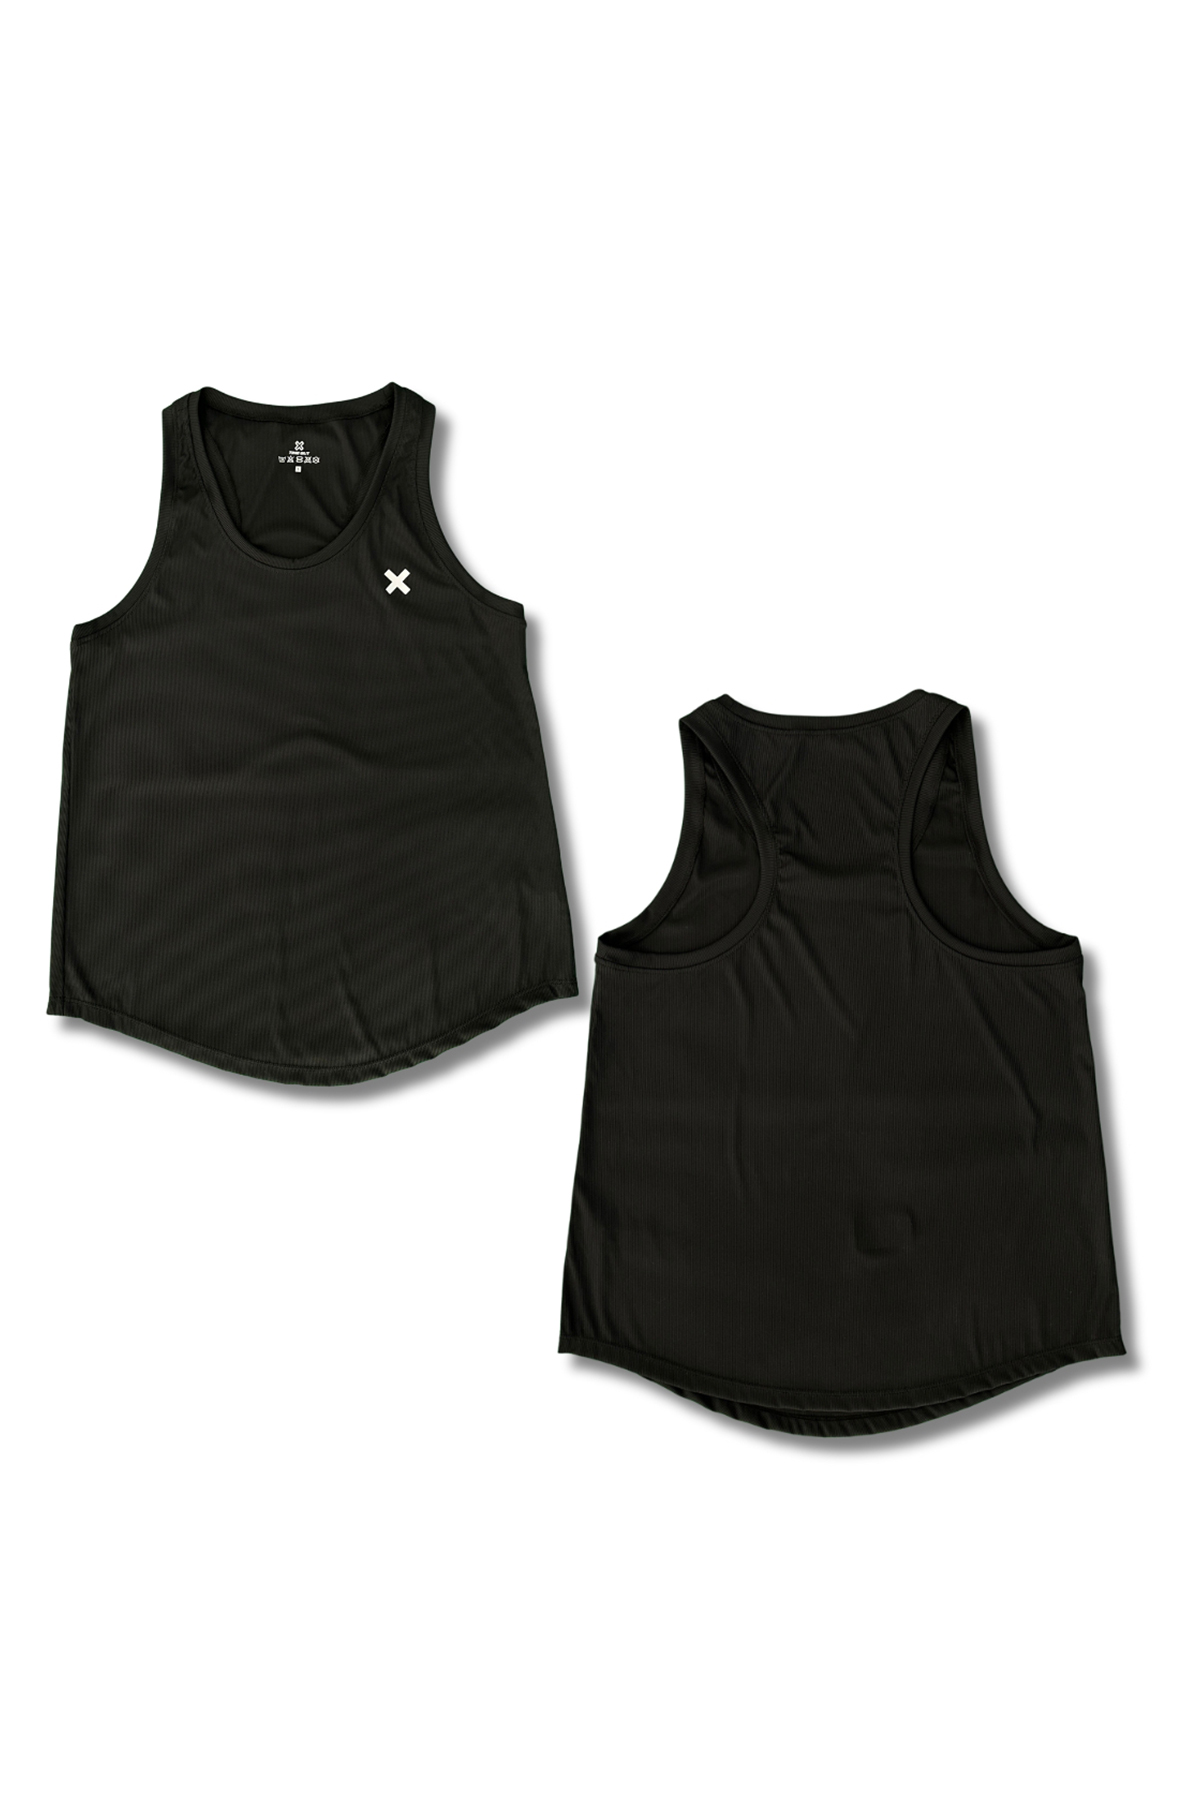 Pro-Fitness-Tank-Top-for-Women-black-back-front